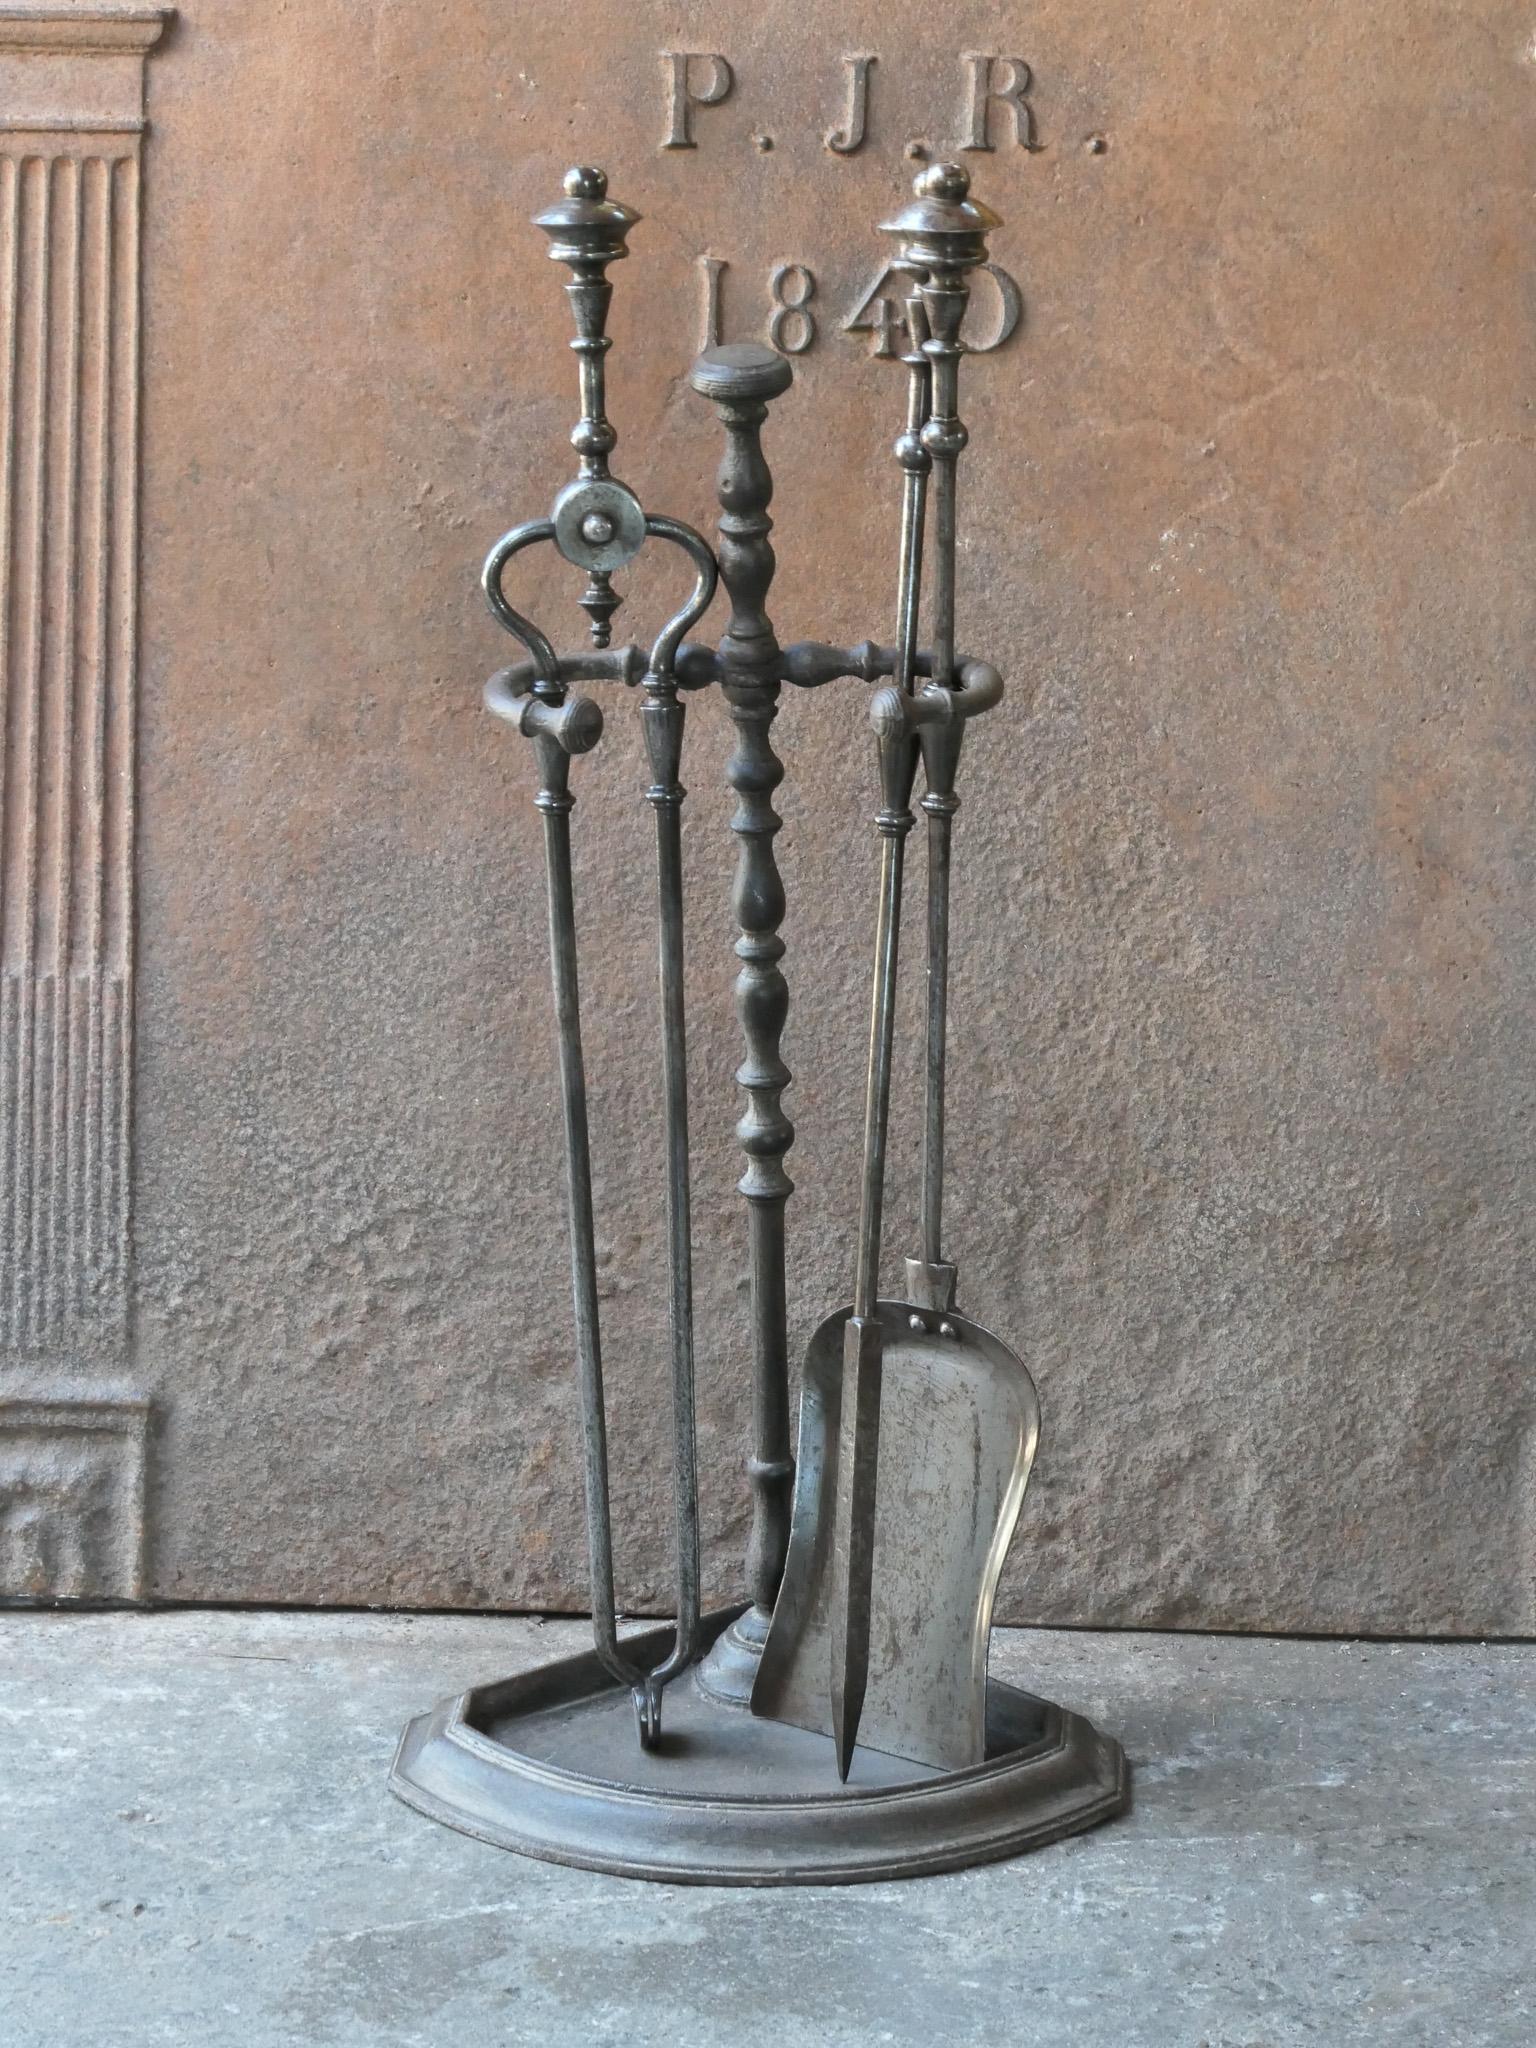 Beautiful 18th - 19th century English Georgian fireplace tool set. The tool set consists of tongs, shovel, poker and stand. The stand is made of wrought iron and cast iron and the tools are made of wrought iron. The set is in a good condition and